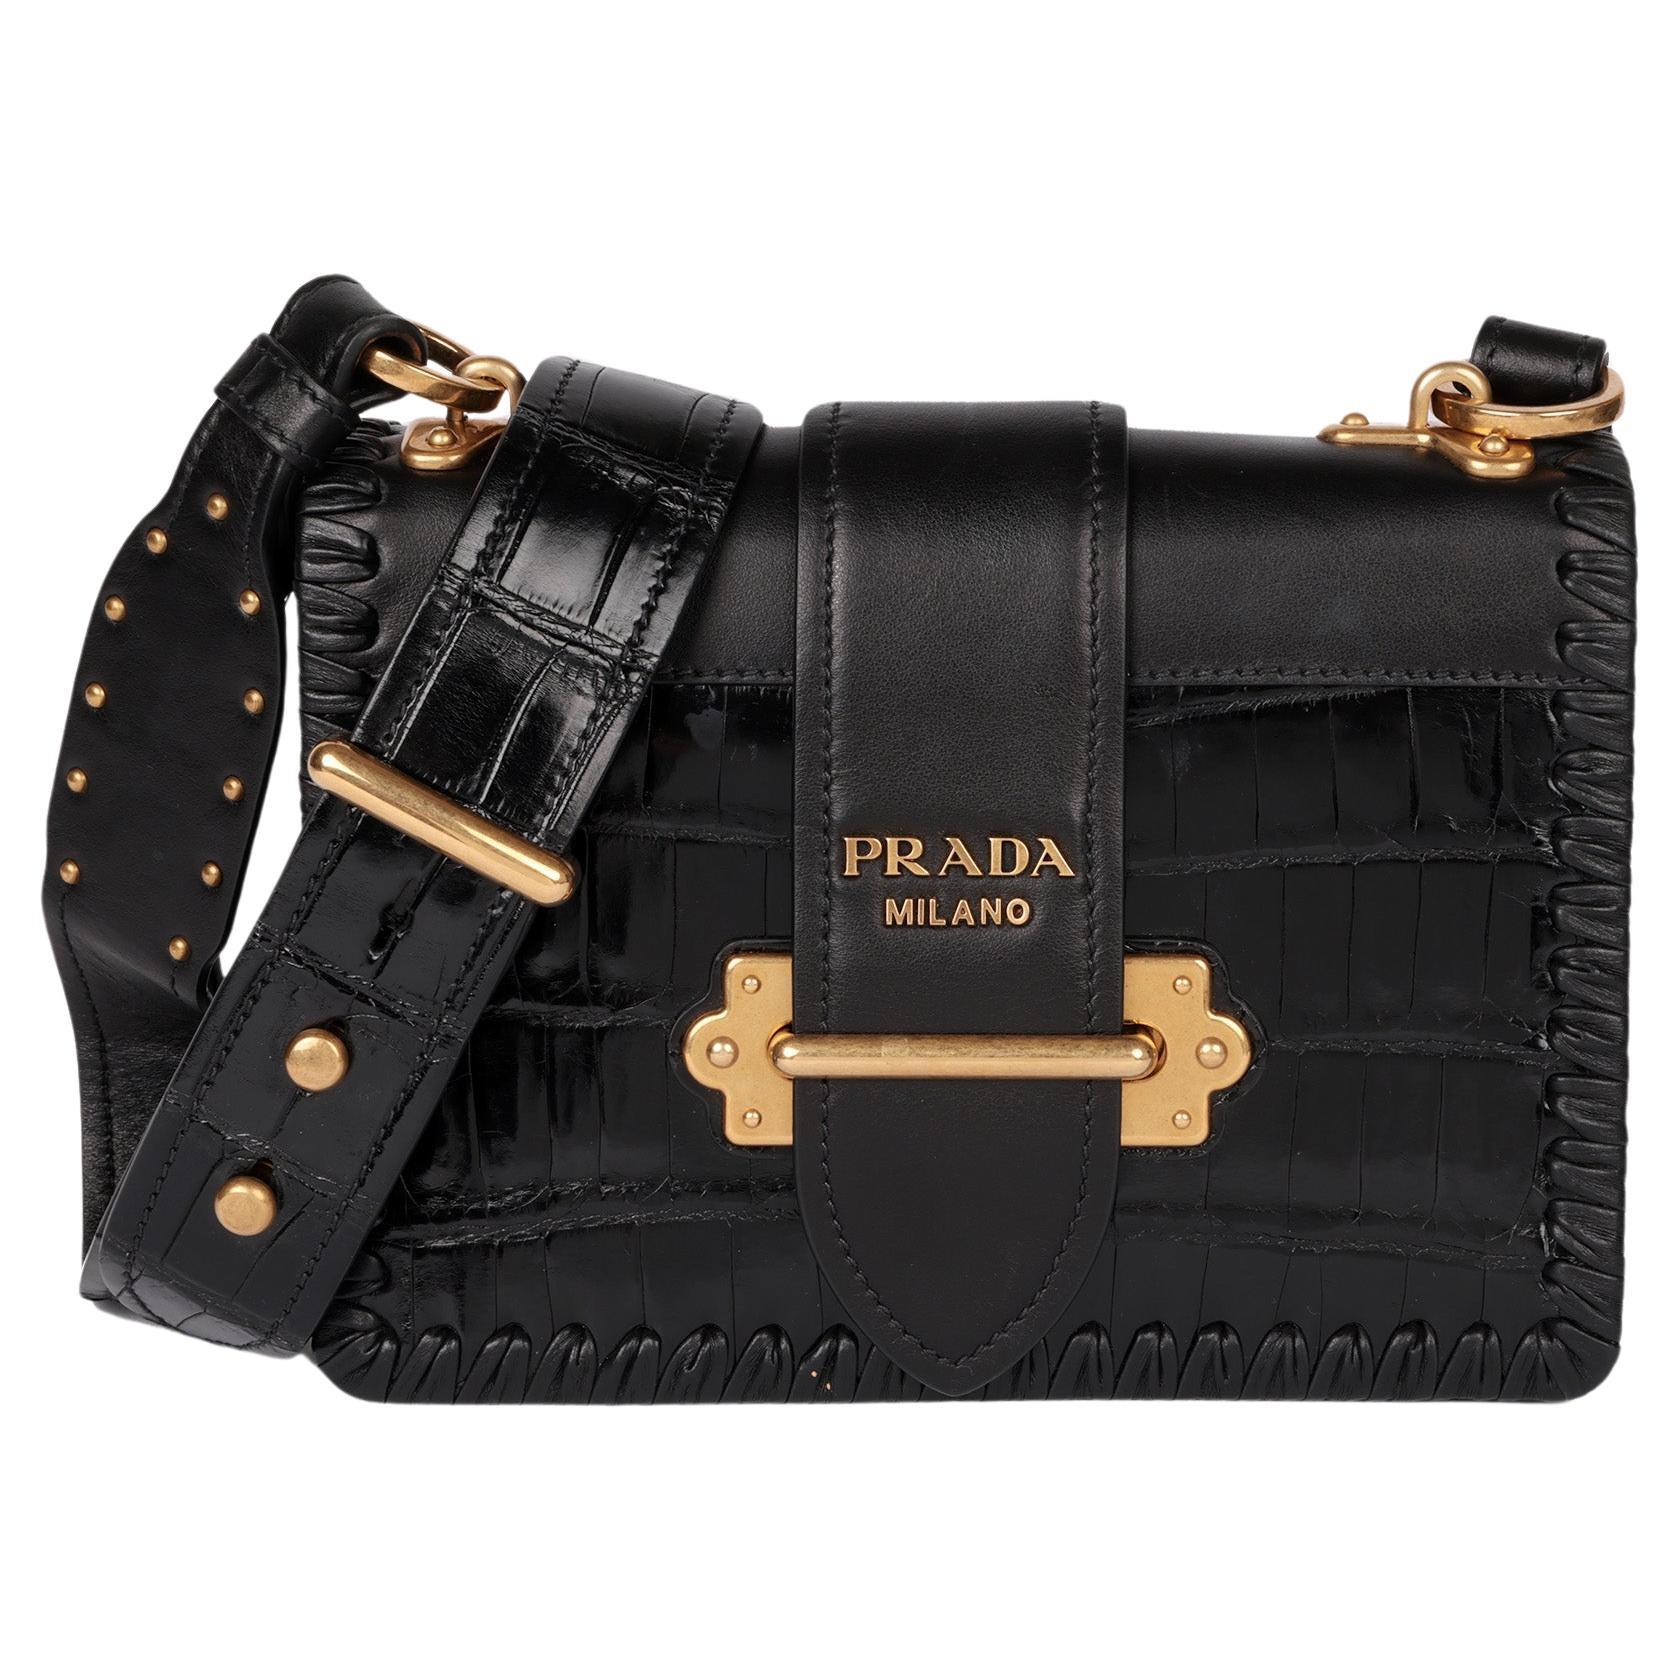 How can you tell if a Prada purse is real?